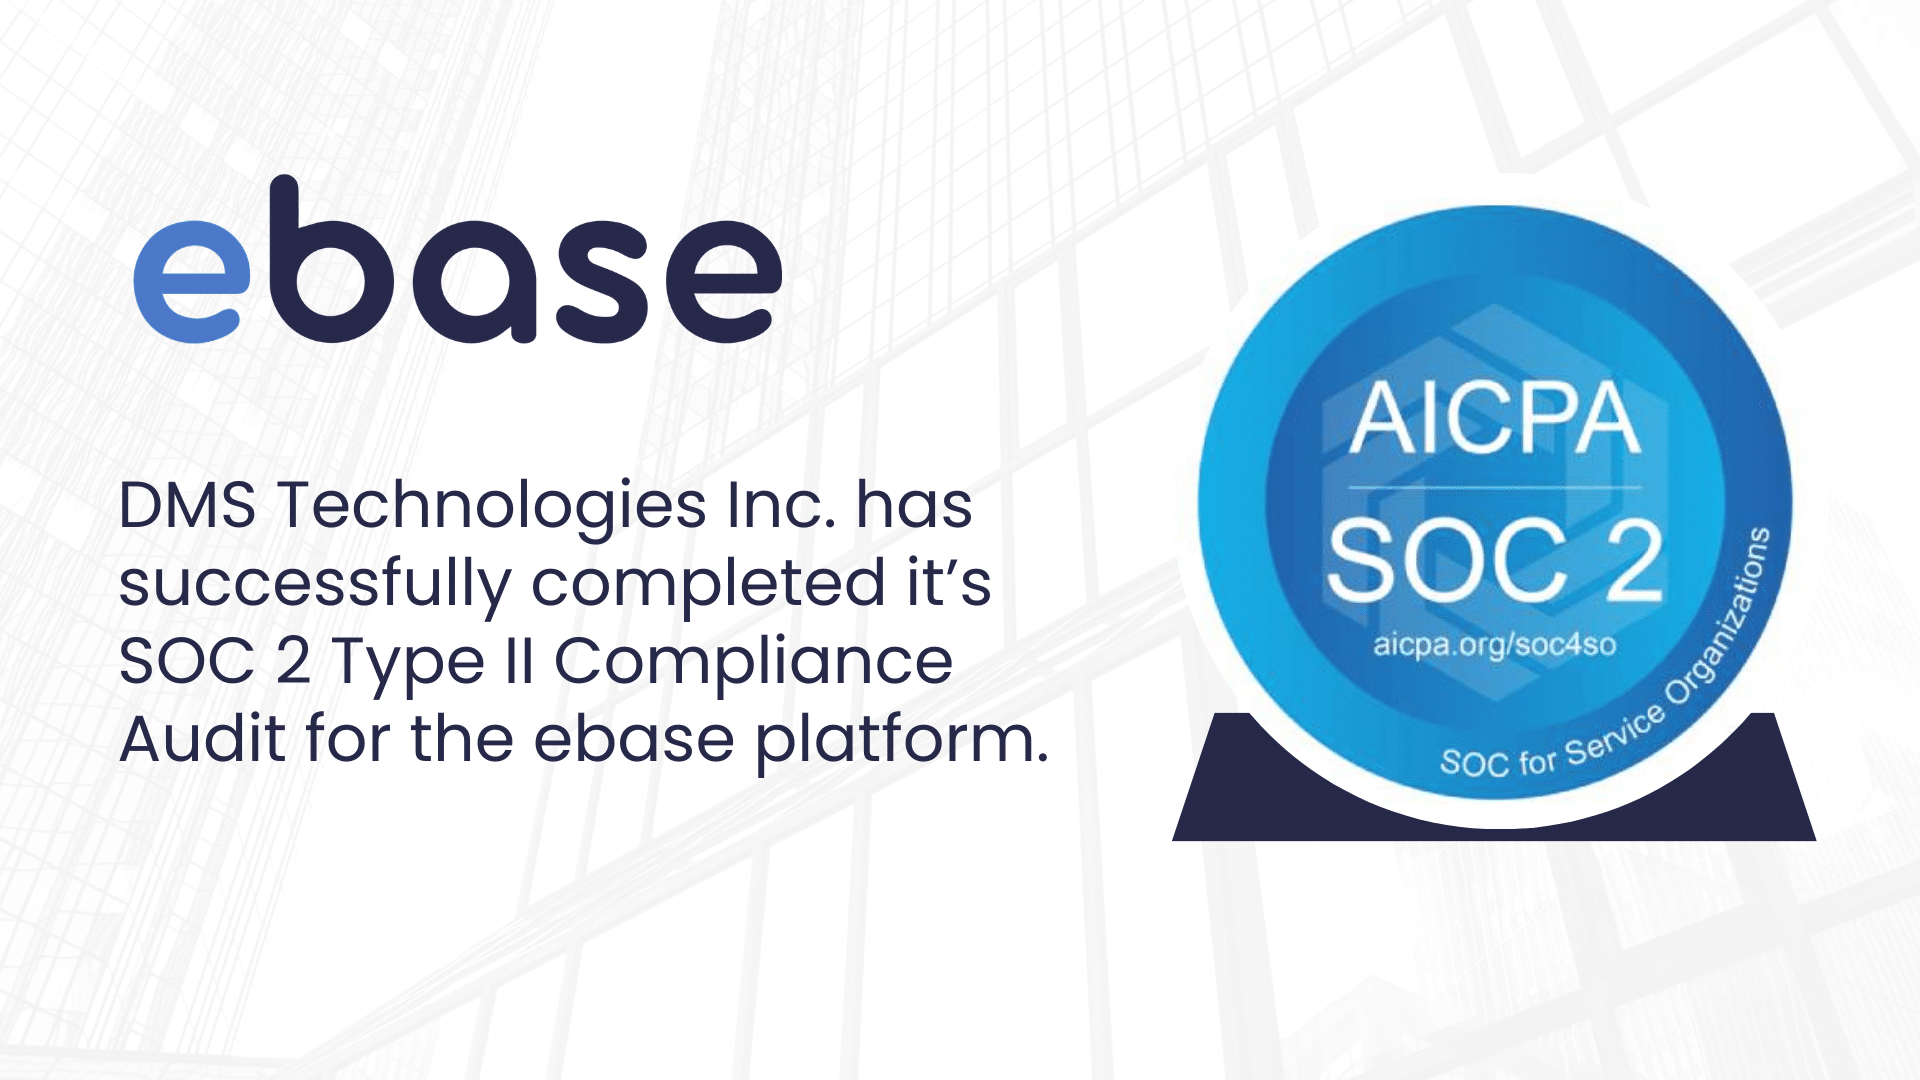 The image features the ebase logo above text reading, "DMS Technologies Inc. has successfully completed its SOC 2 Type II Compliance Audit for the ebase platform." To the right, there's a blue circular SOC 2 certification badge from AICPA with a background of a building structure.